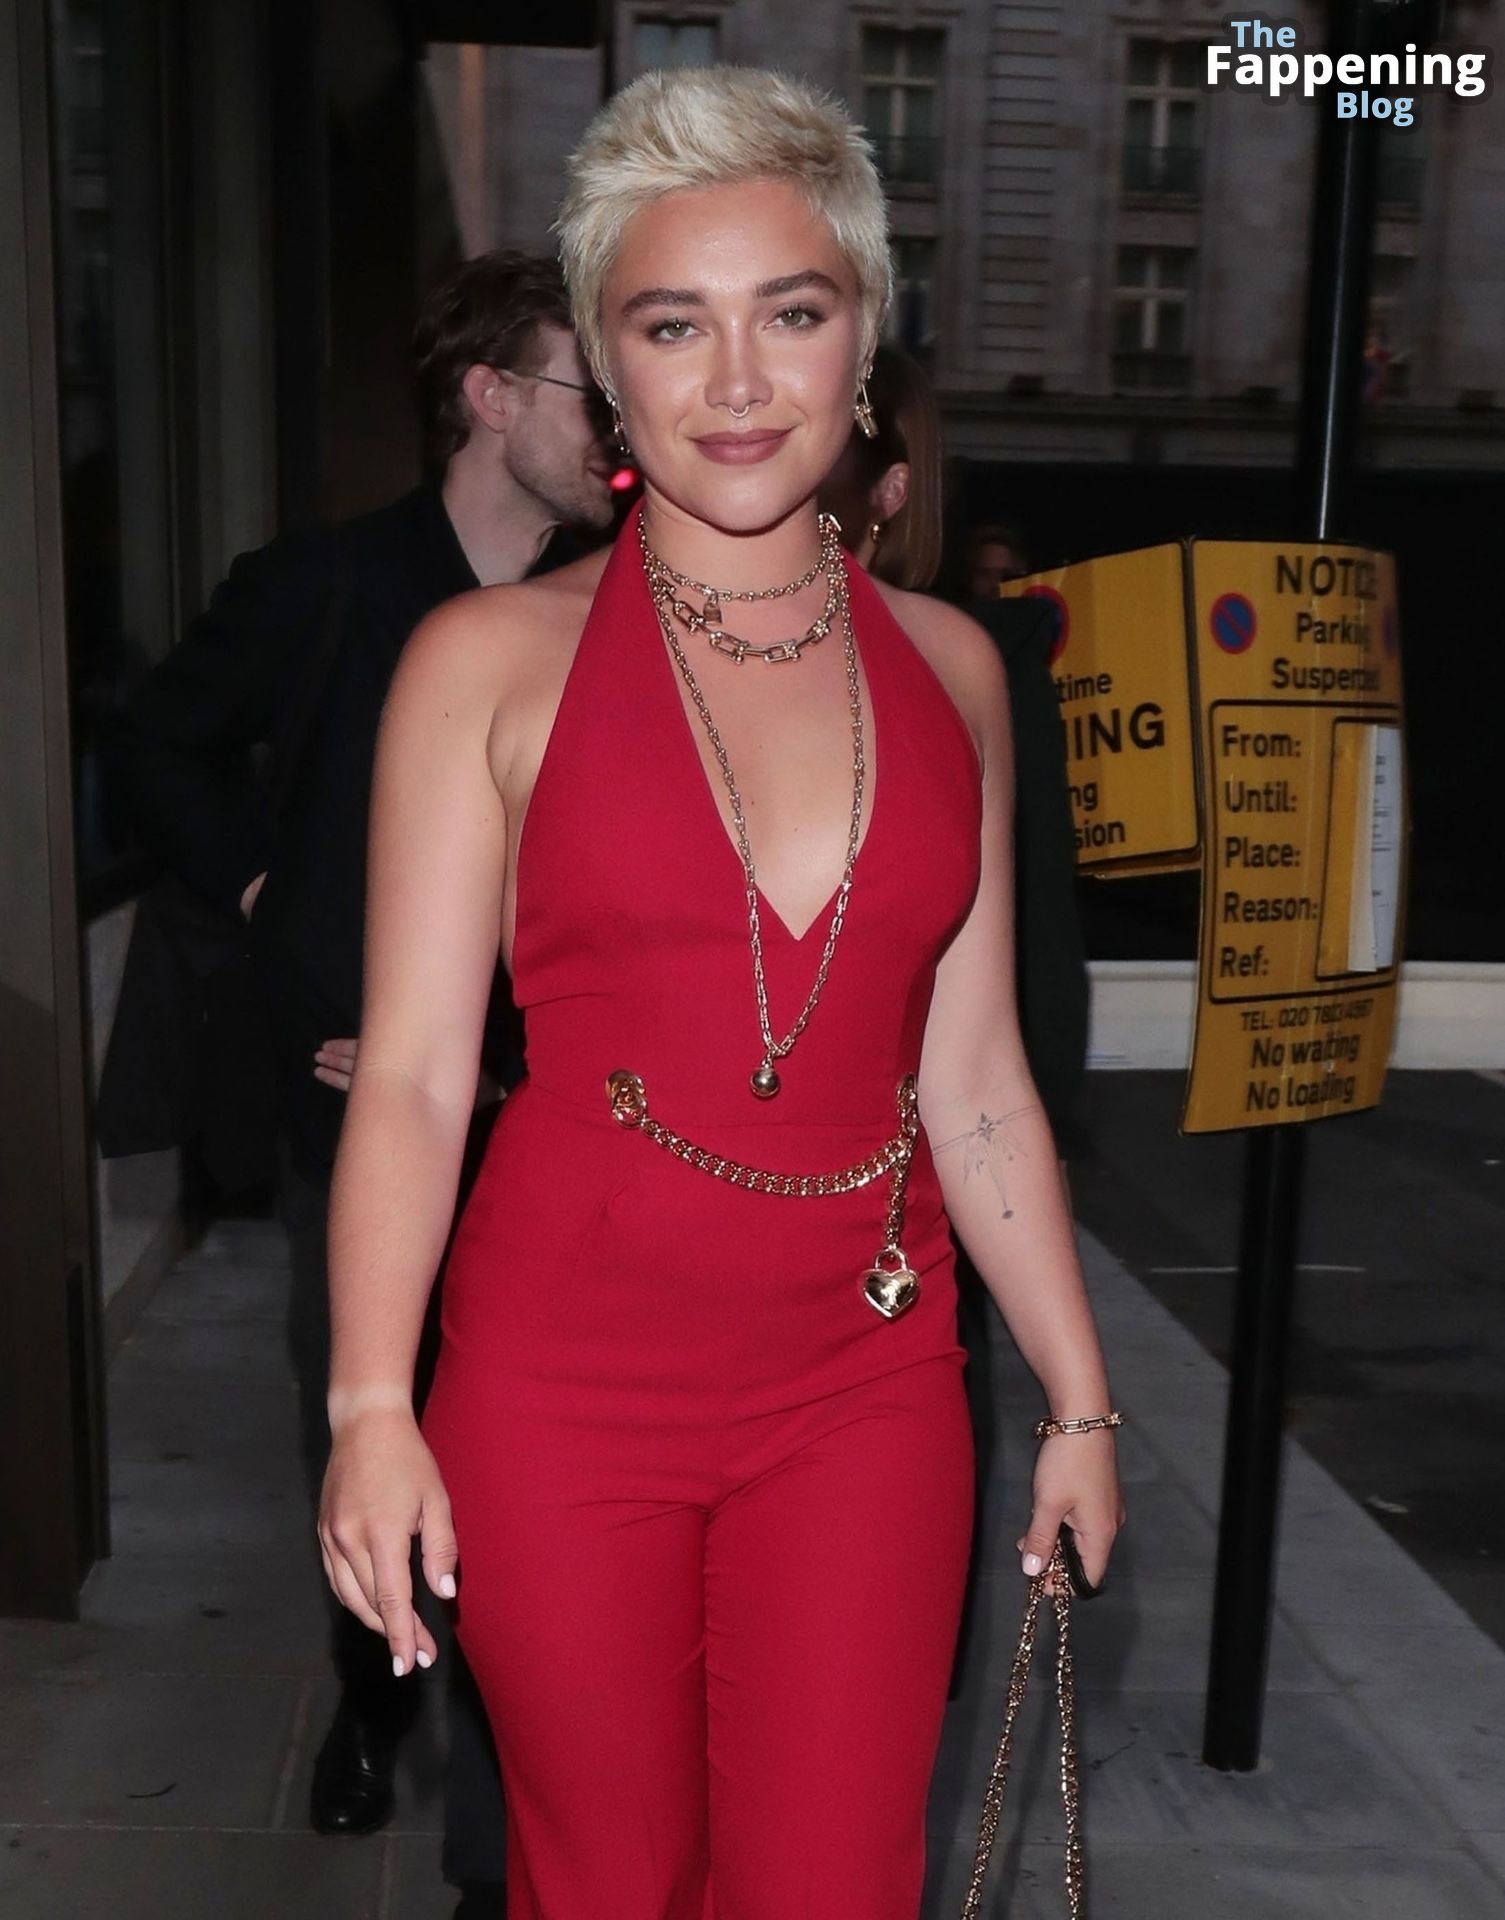 Florence-Pugh-Sexy-The-Fappening-Blog-7-1.jpg